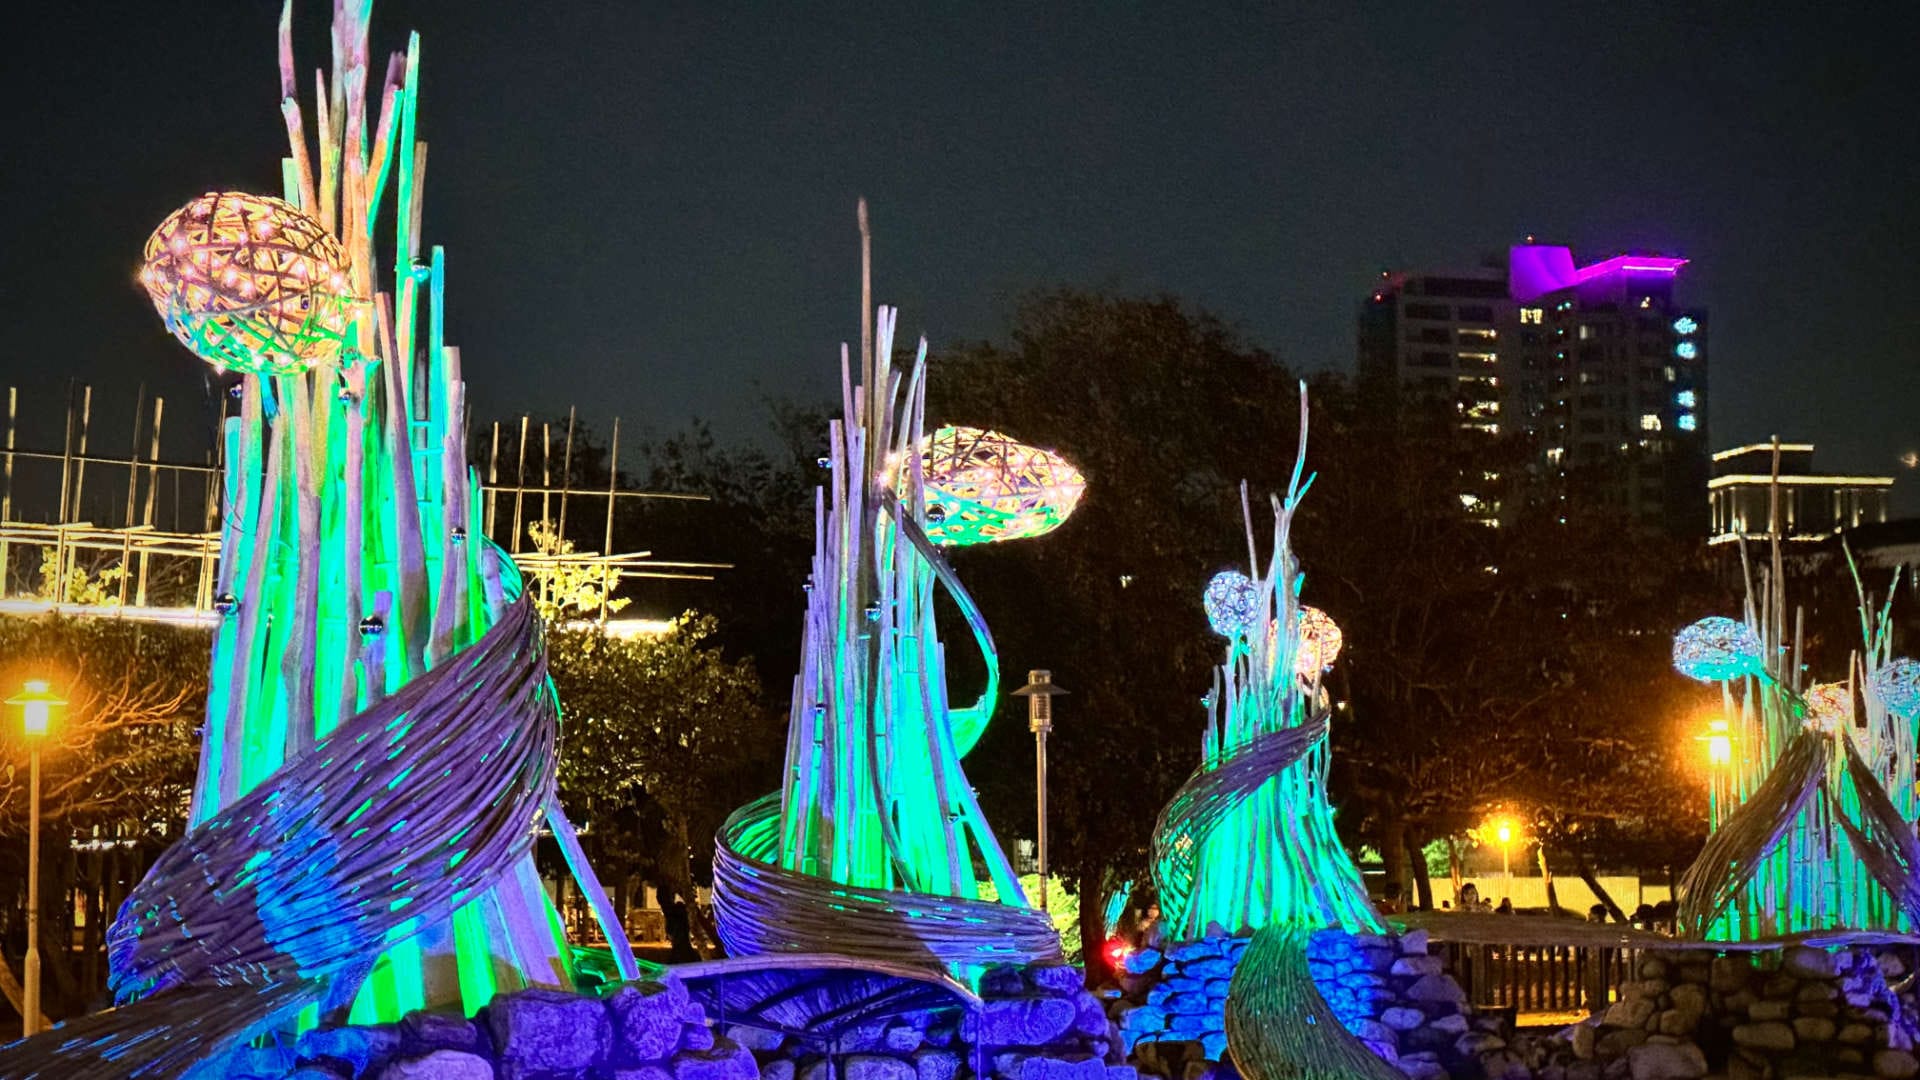 A series of illuminated tall abstract sculptures that have plant-like buds near the top.